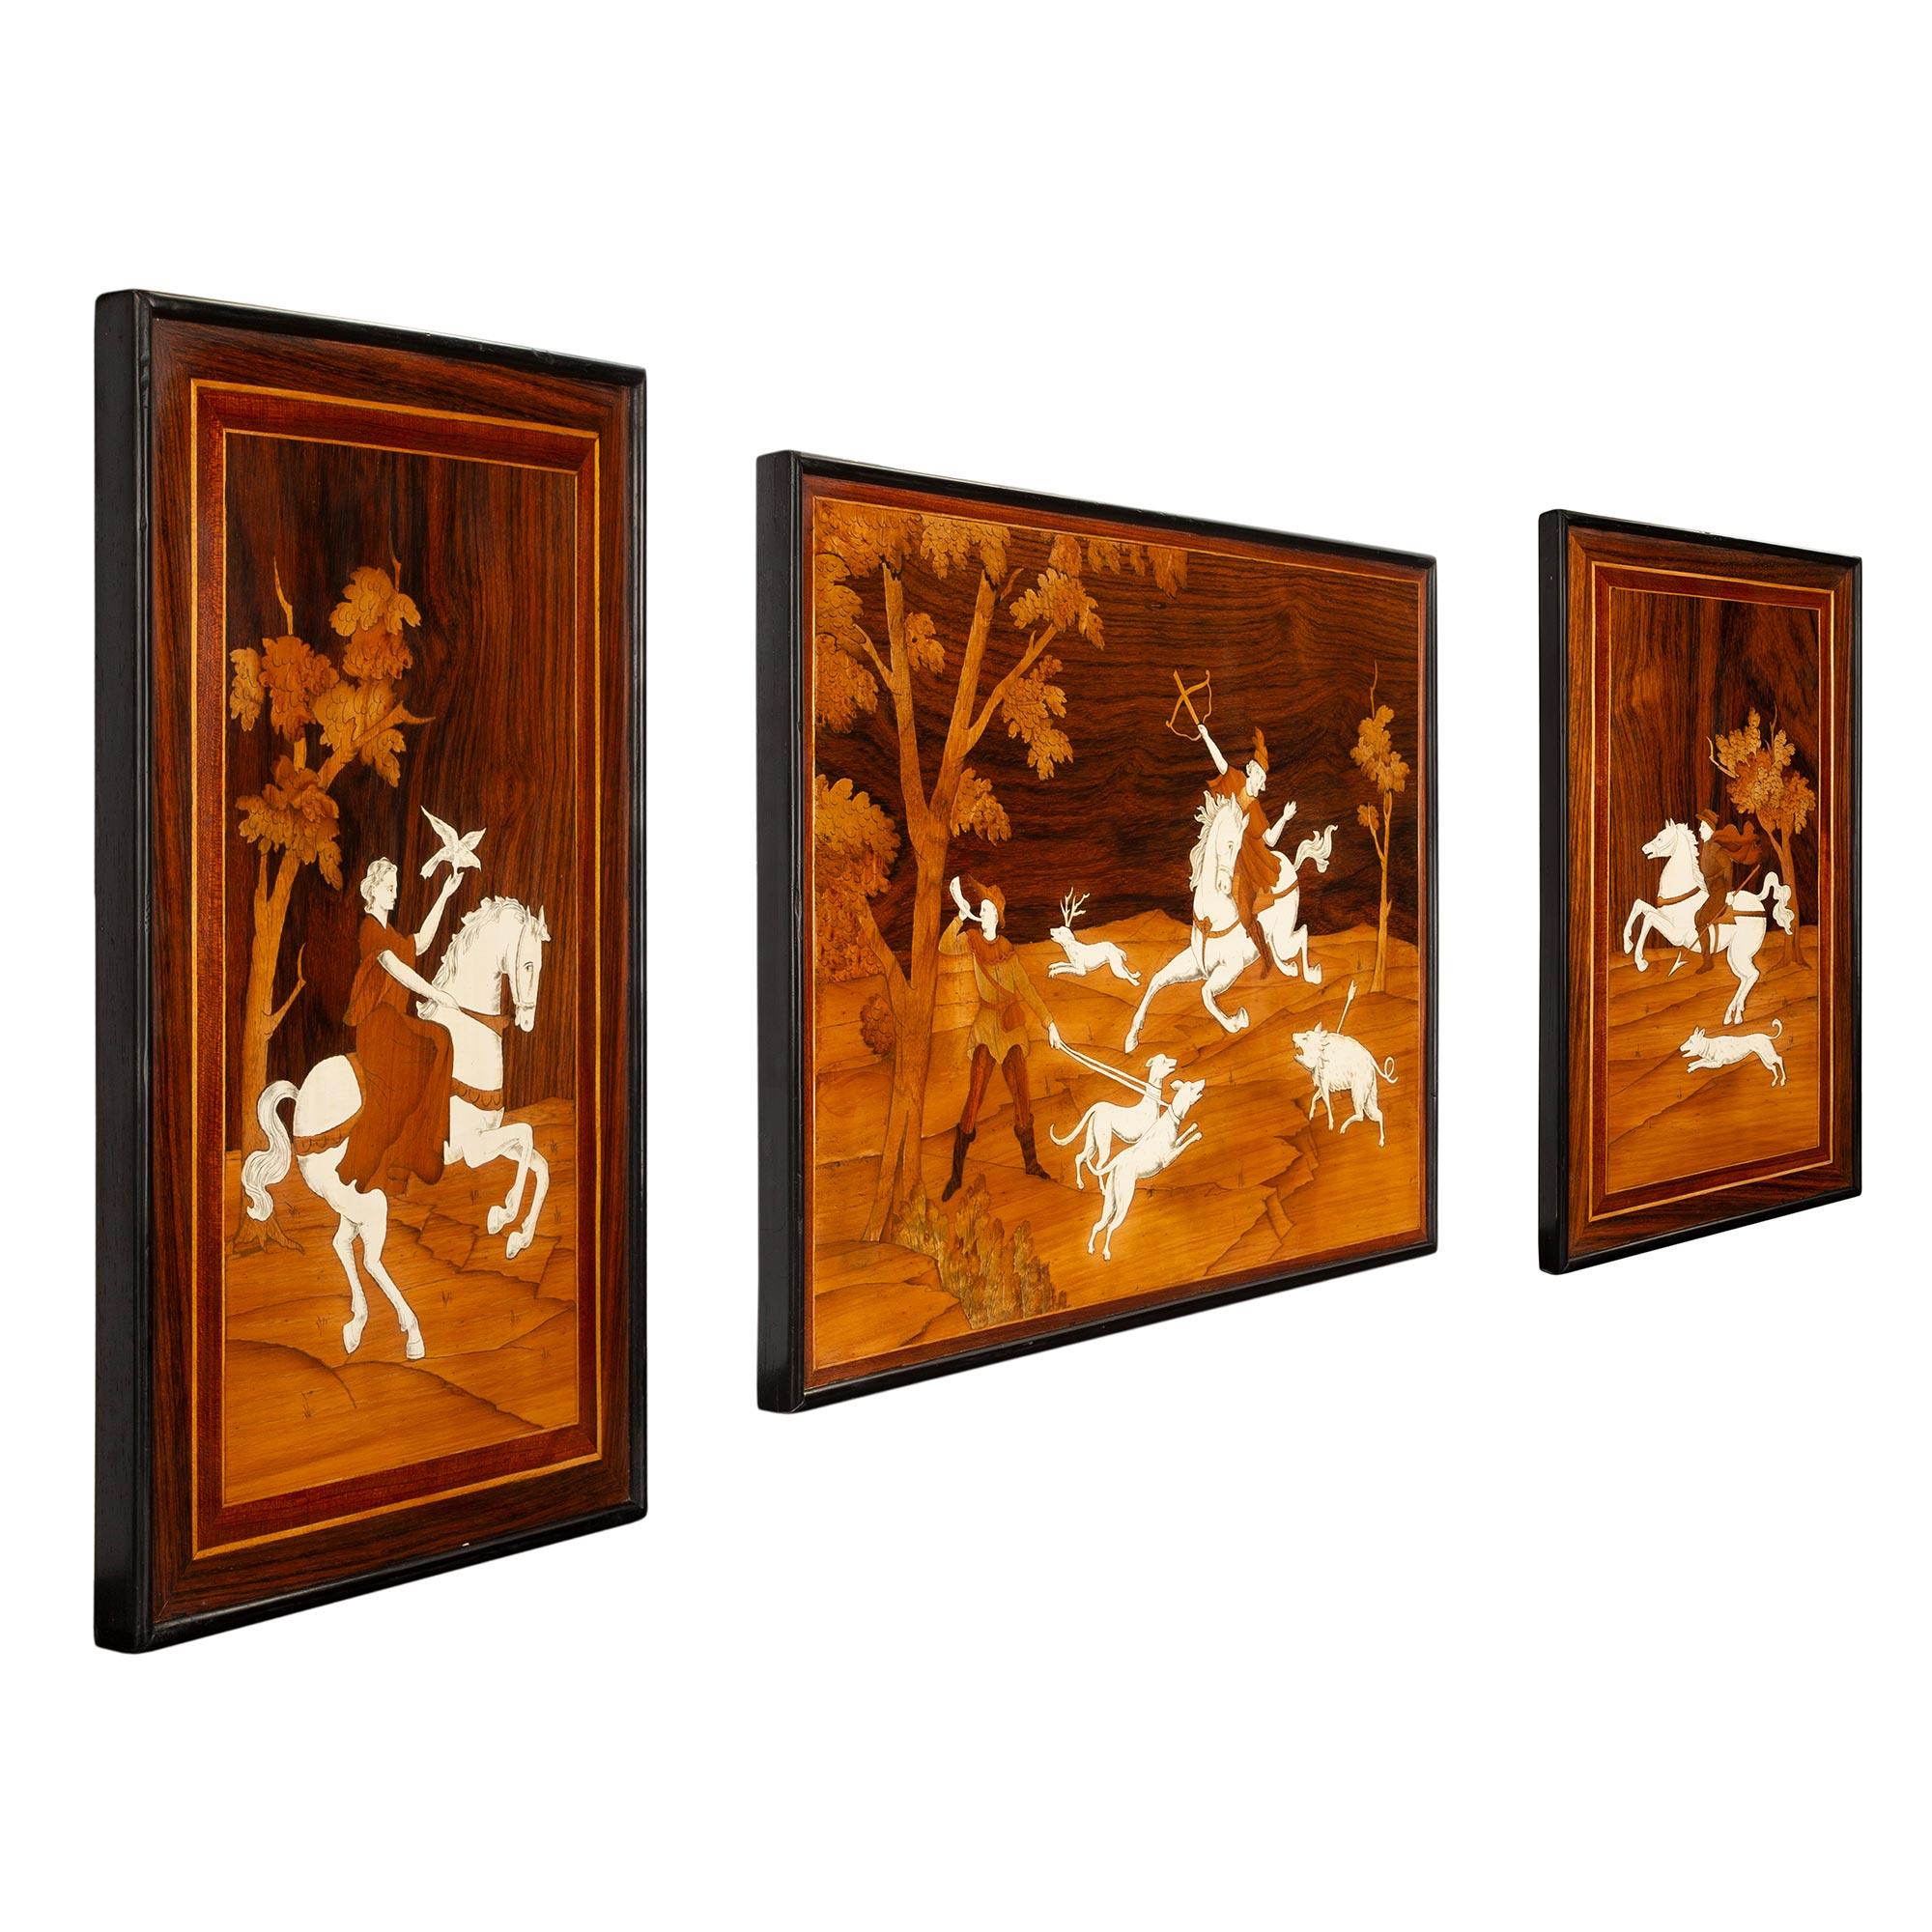 A charming and wonderfully executed complete set of three Italian 19th century bone, ebonized fruitwood, walnut and rosewood decorative marquetry wall panels. Each rectangular panel displays an ebonized fruit wood mottled border and beautiful